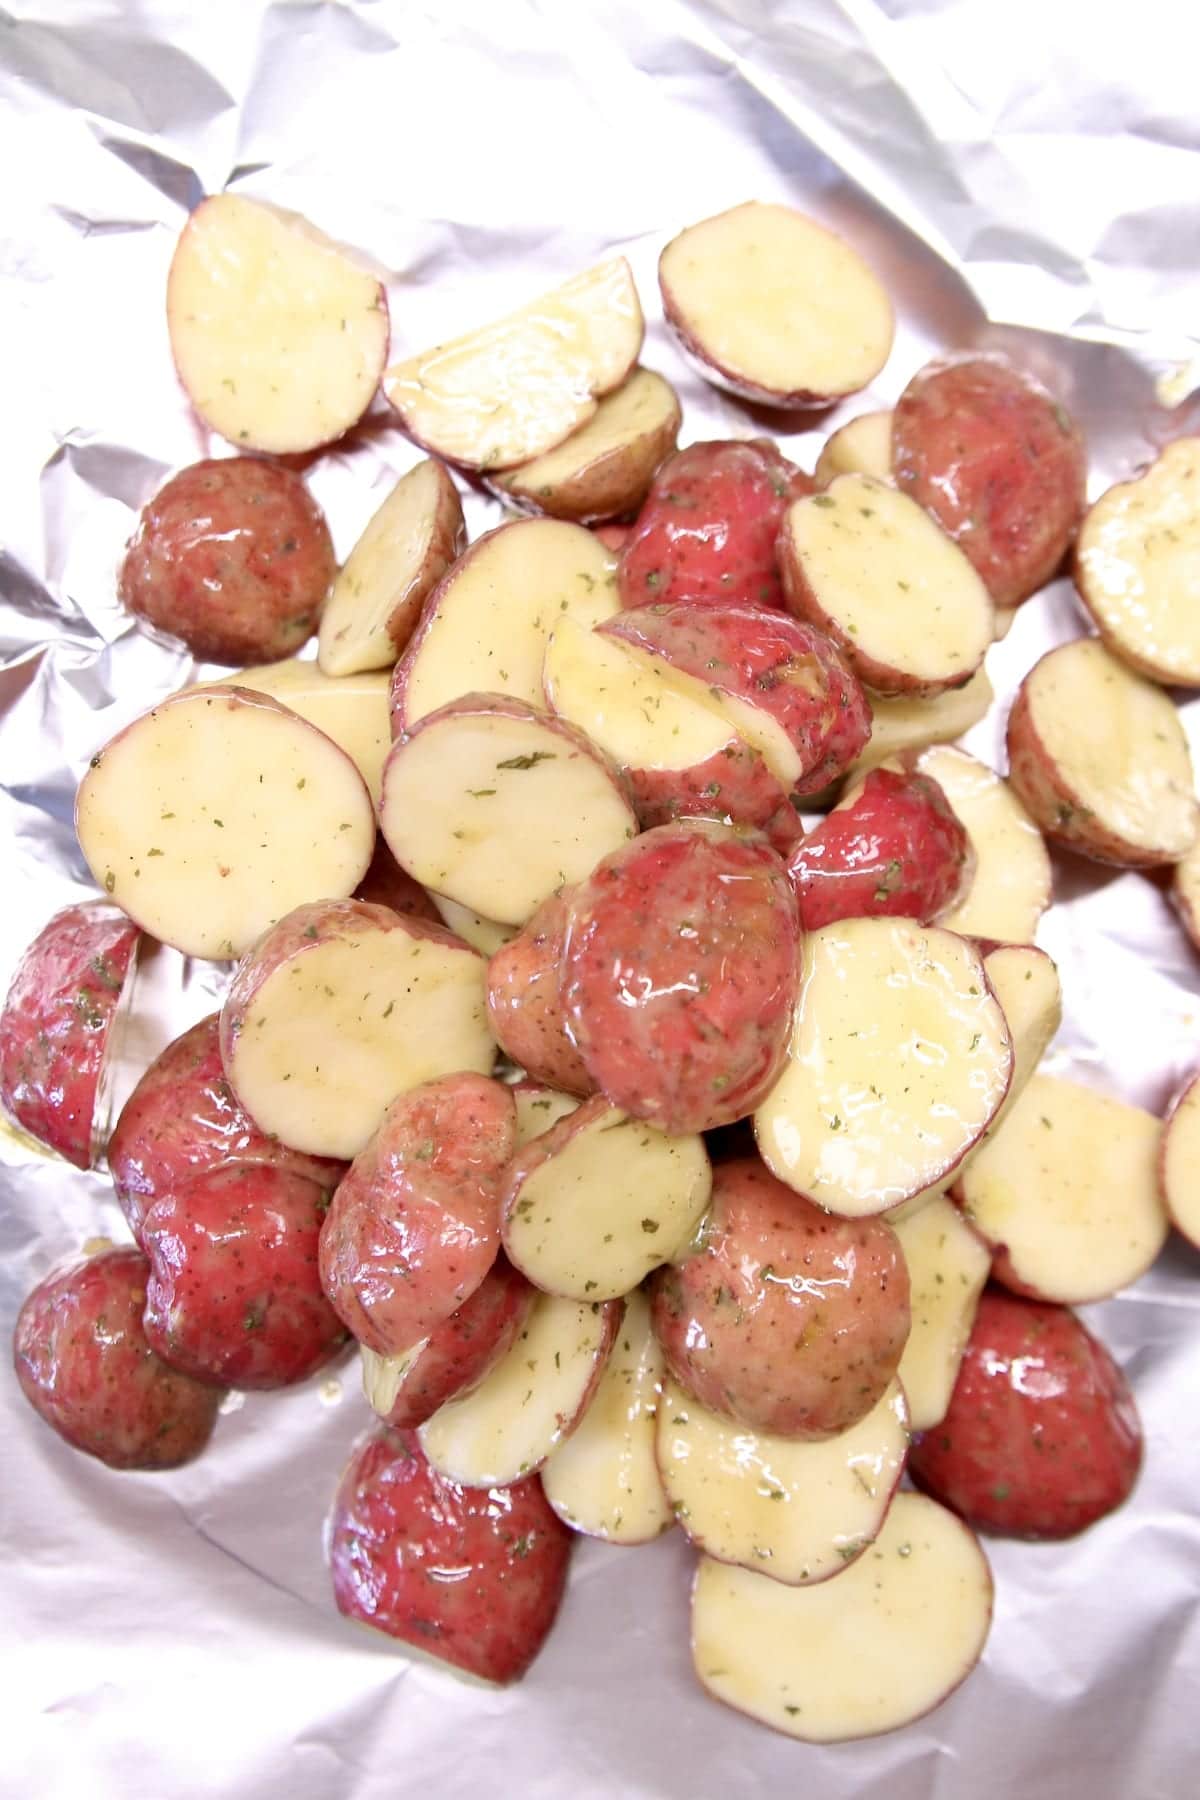 potatoes on foil for grilling